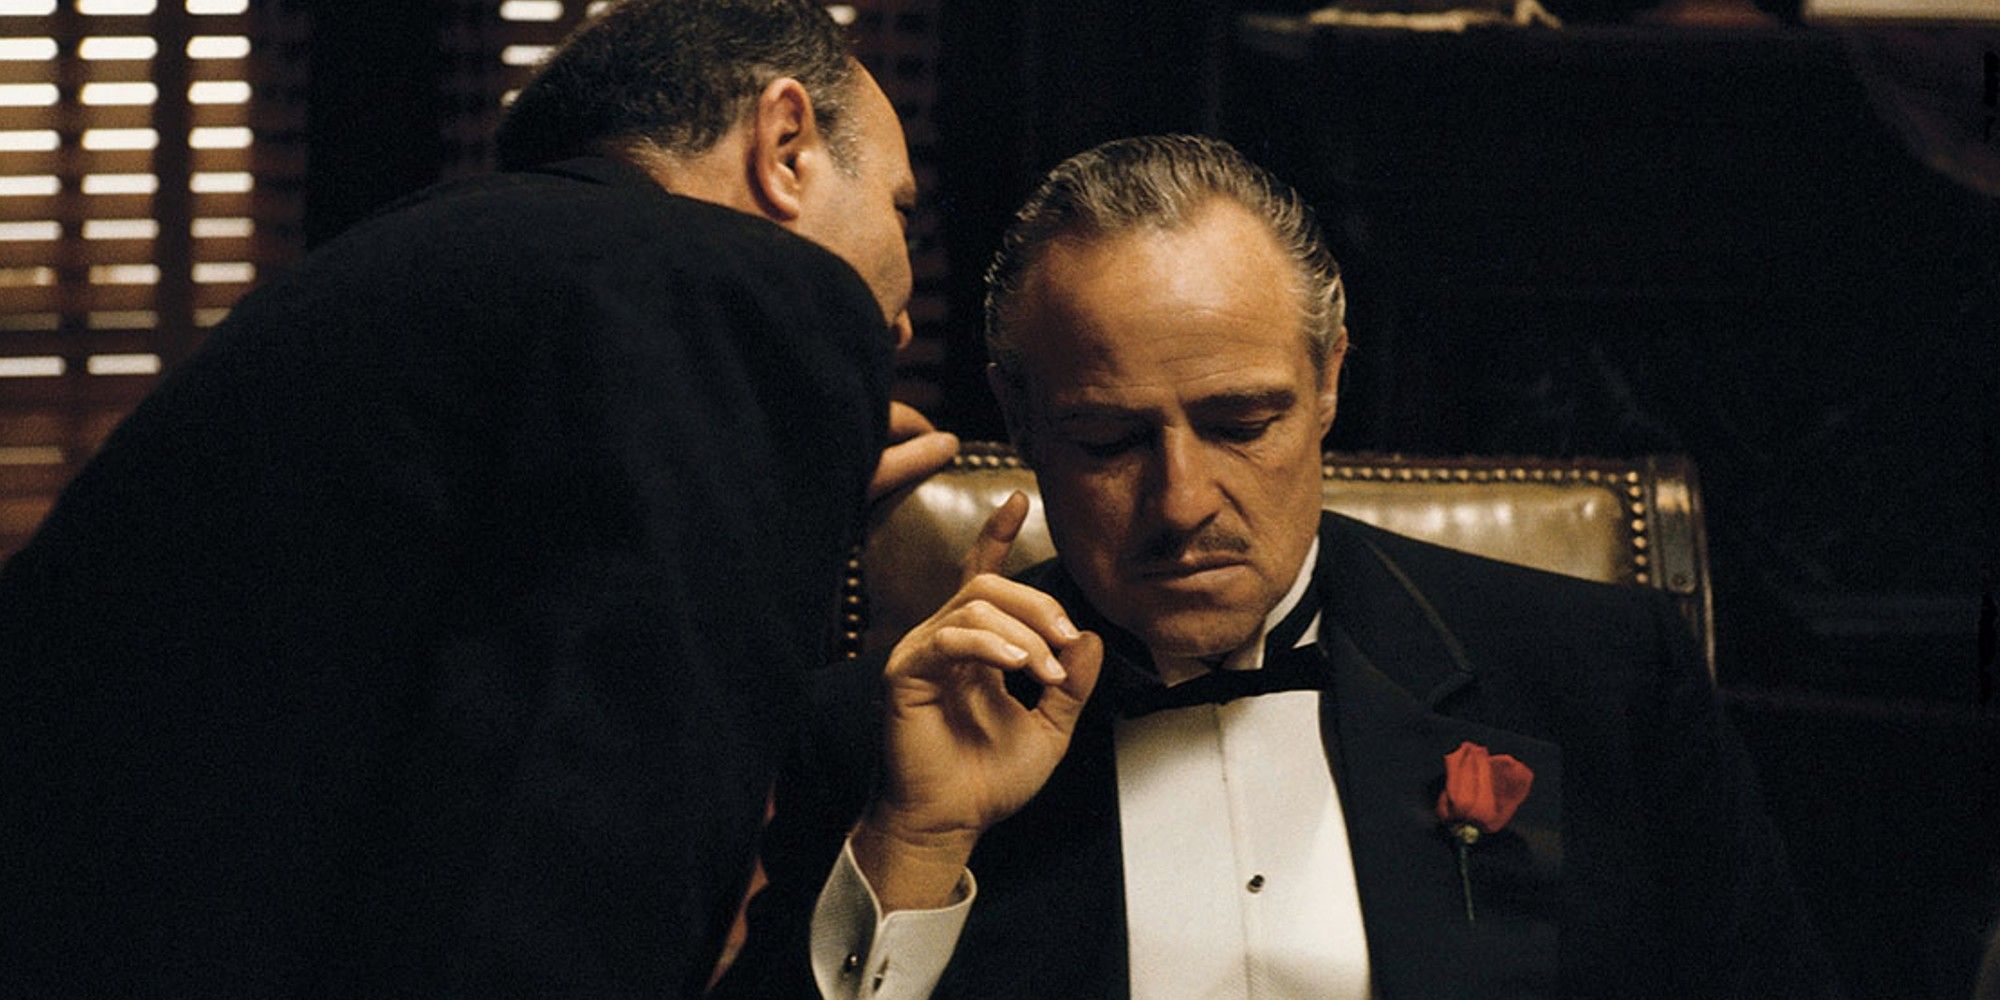 A man whispered something in Marlon Brando's ear in The Godfather